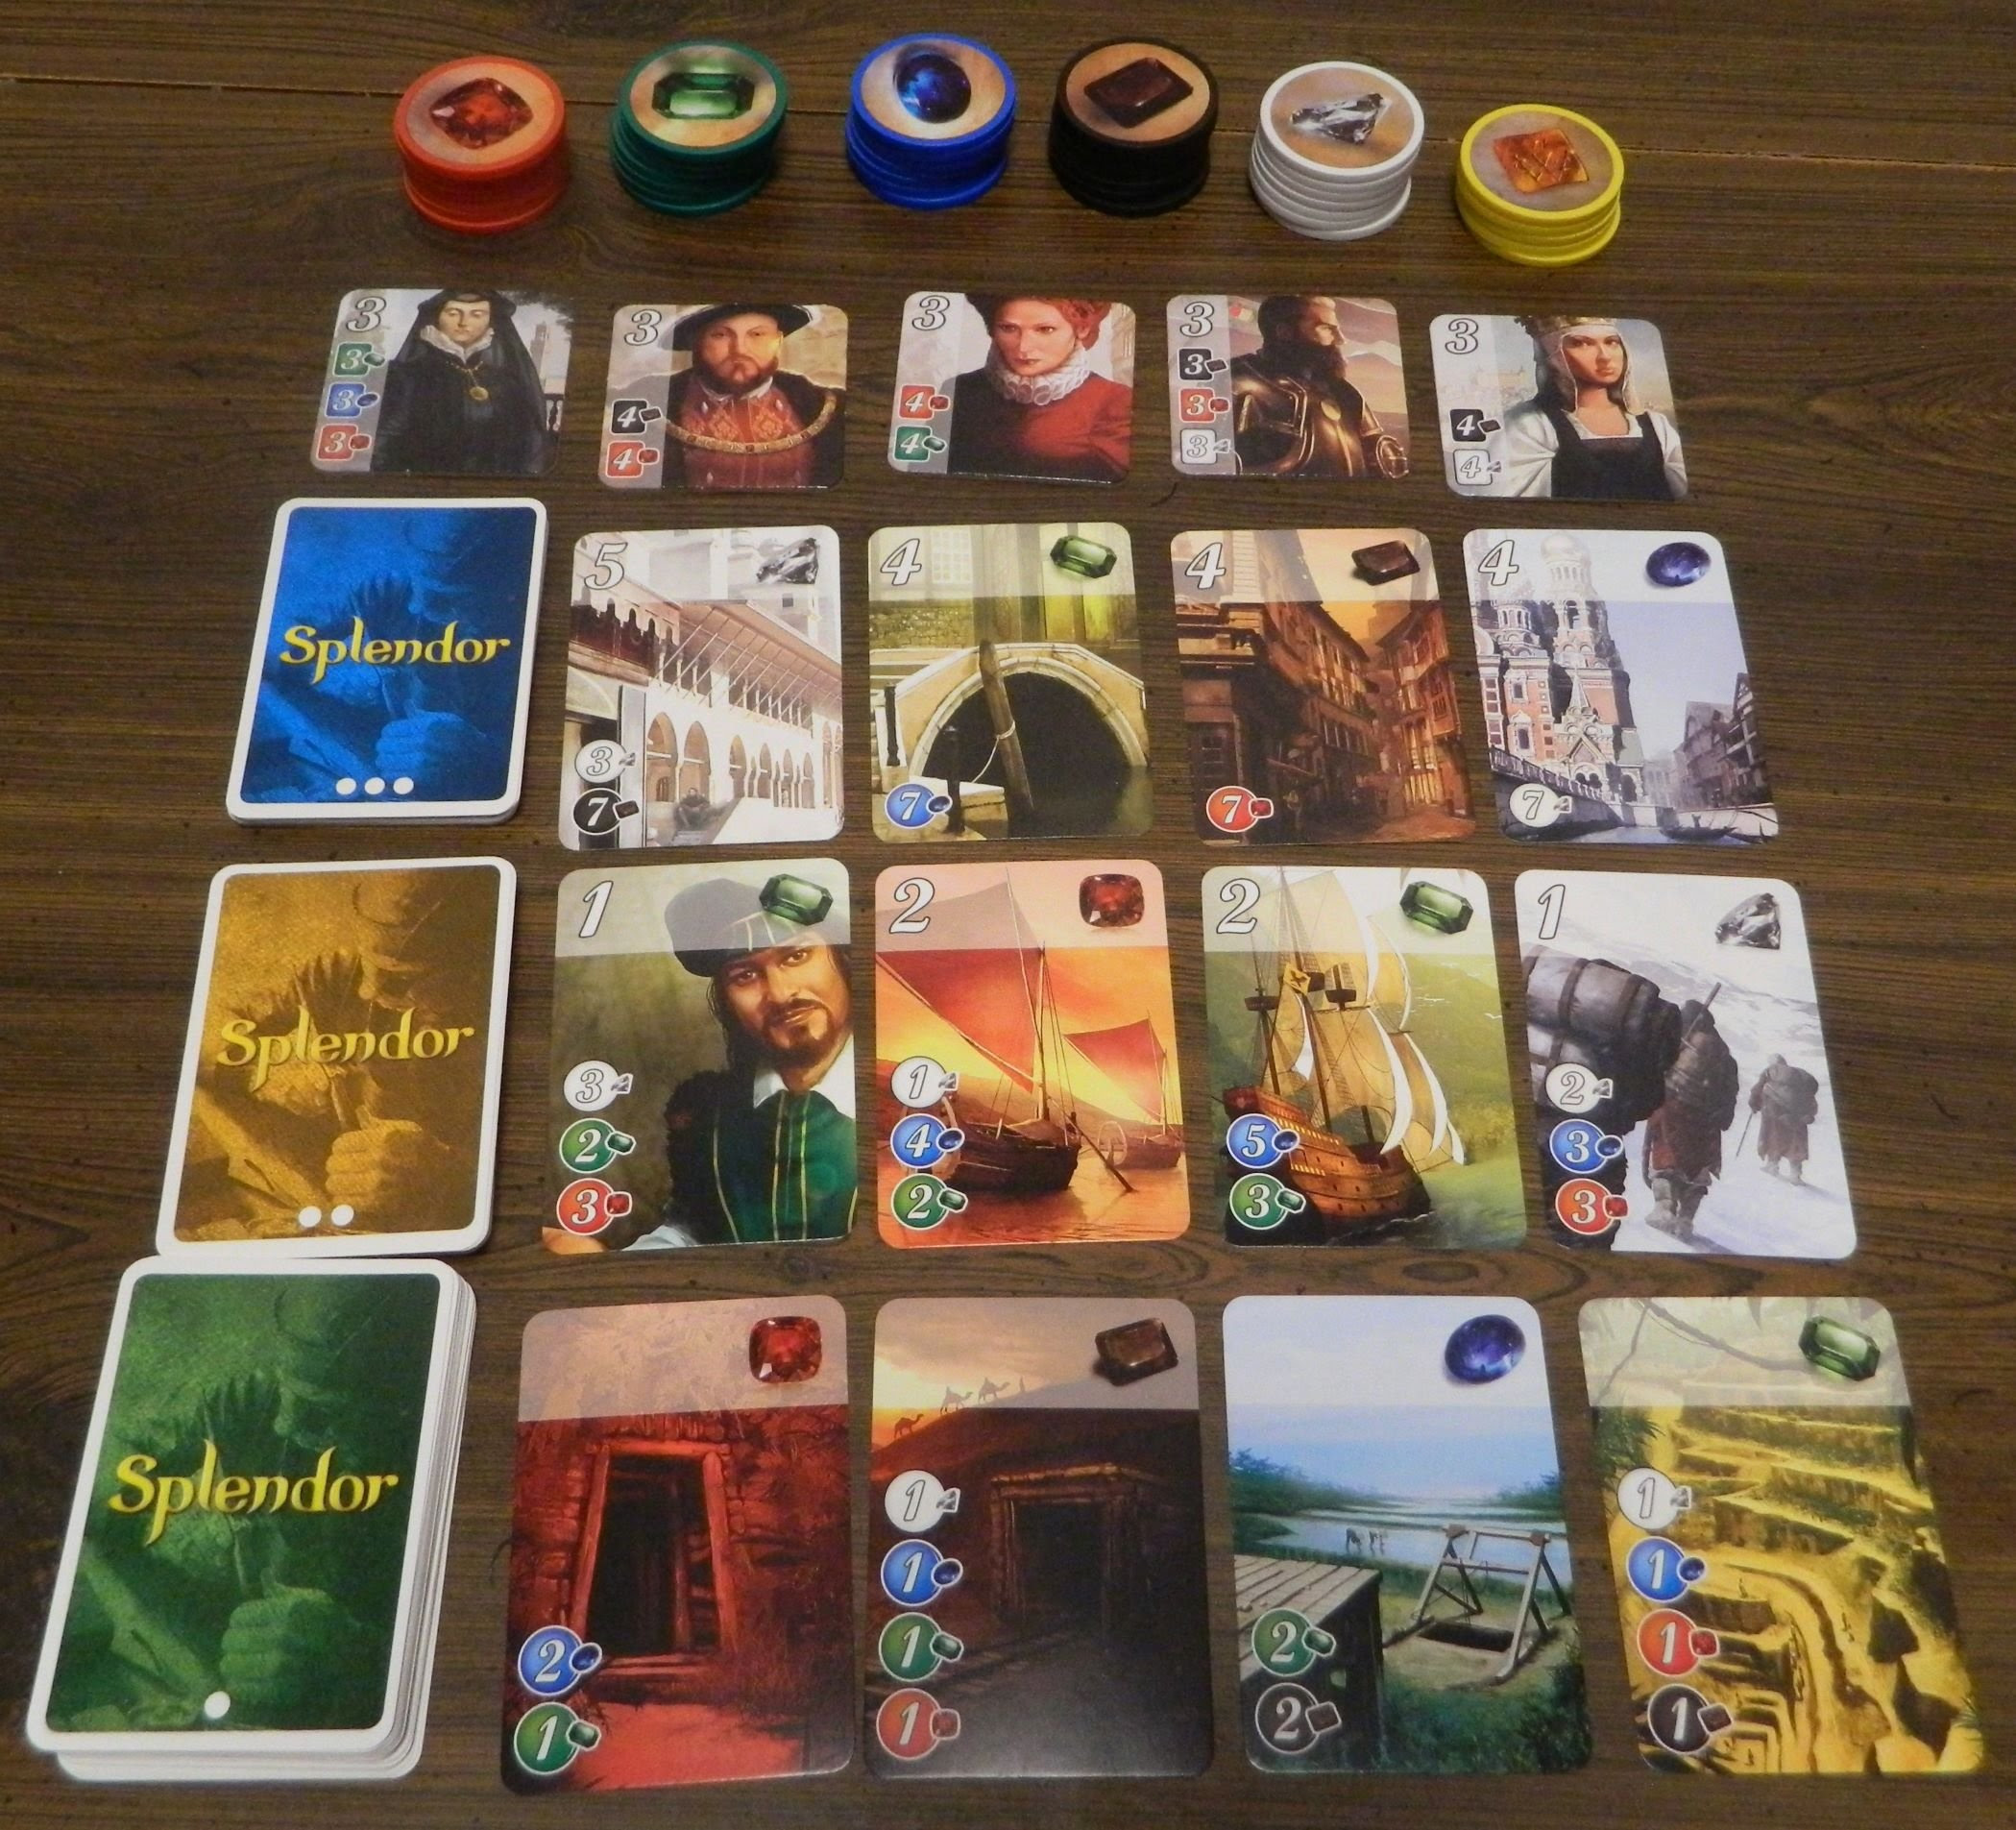 Splendor Board Game Review and Rules | Geeky Hobbies